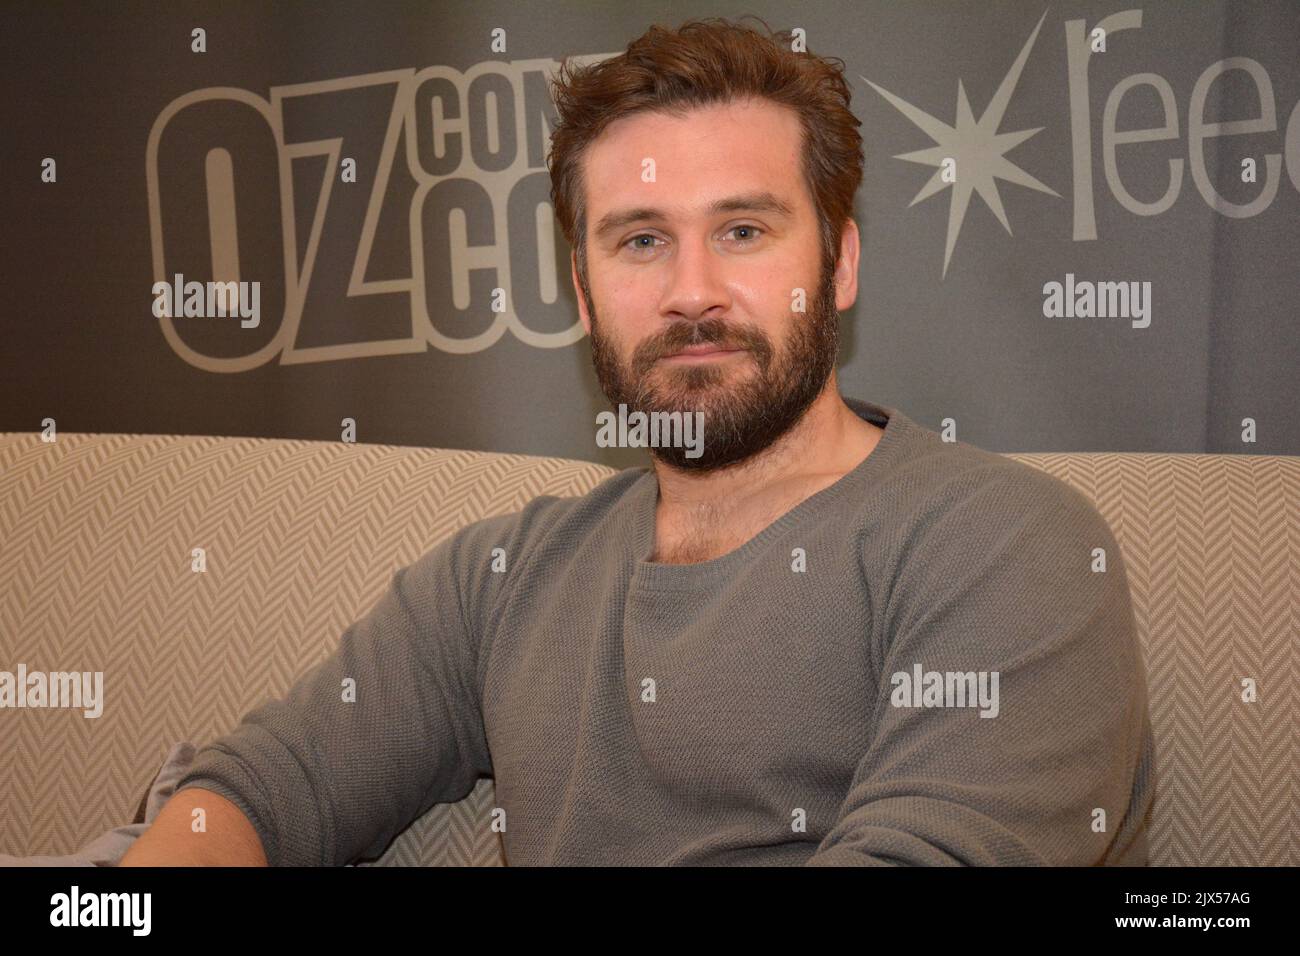 Vikings star Clive Standen, who plays Rollo, during an interview